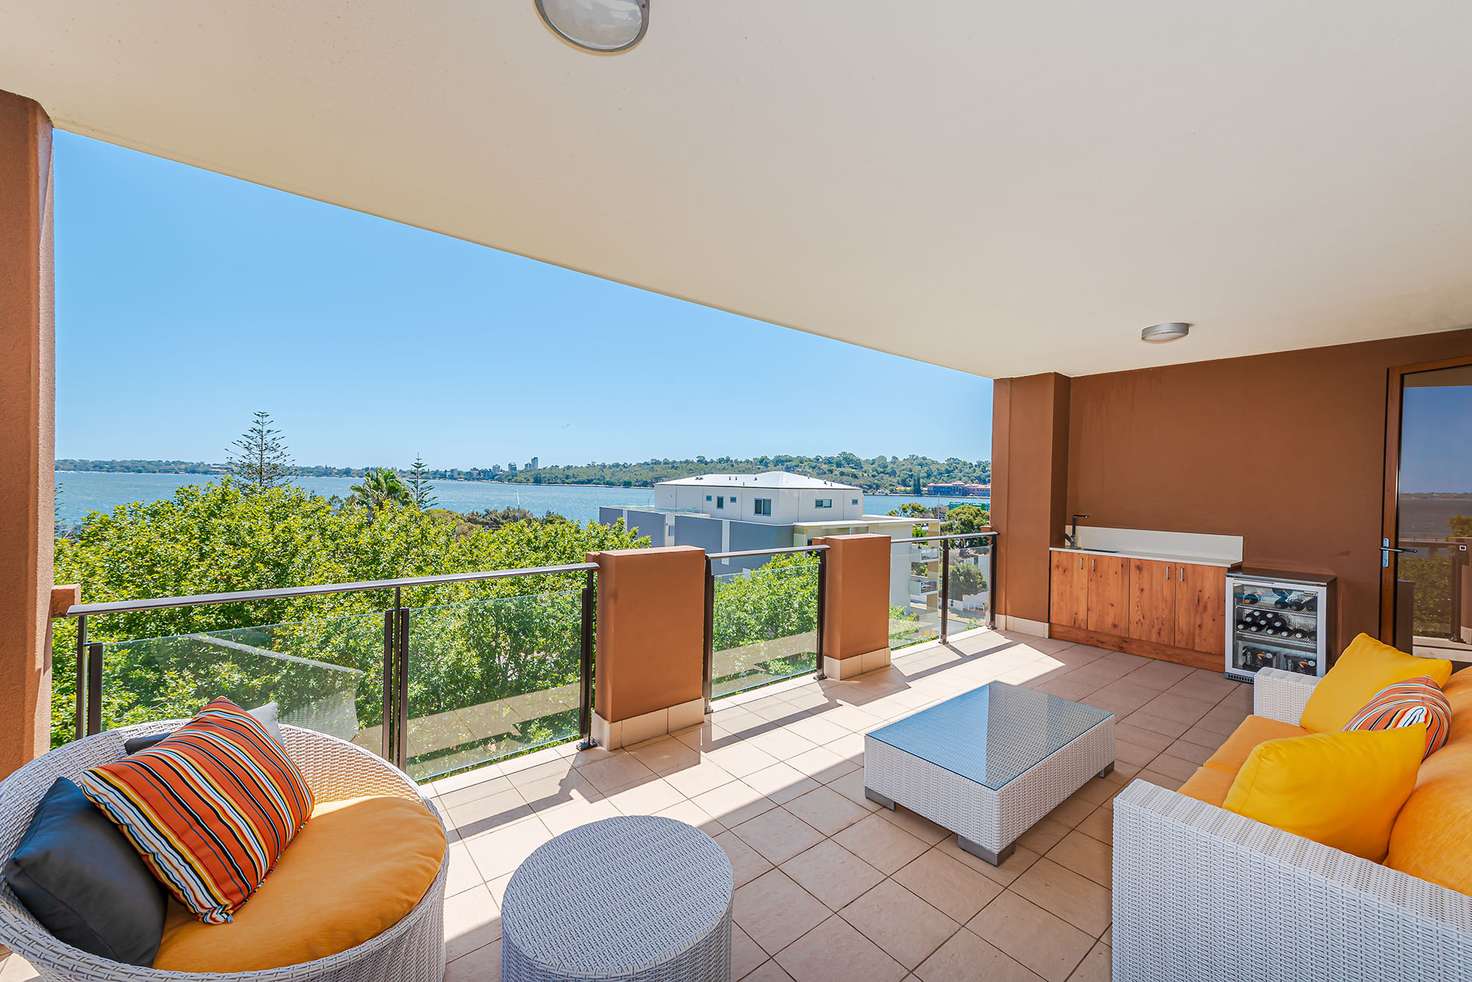 Main view of Homely apartment listing, 5D/73 Mill Point Rd, South Perth WA 6151